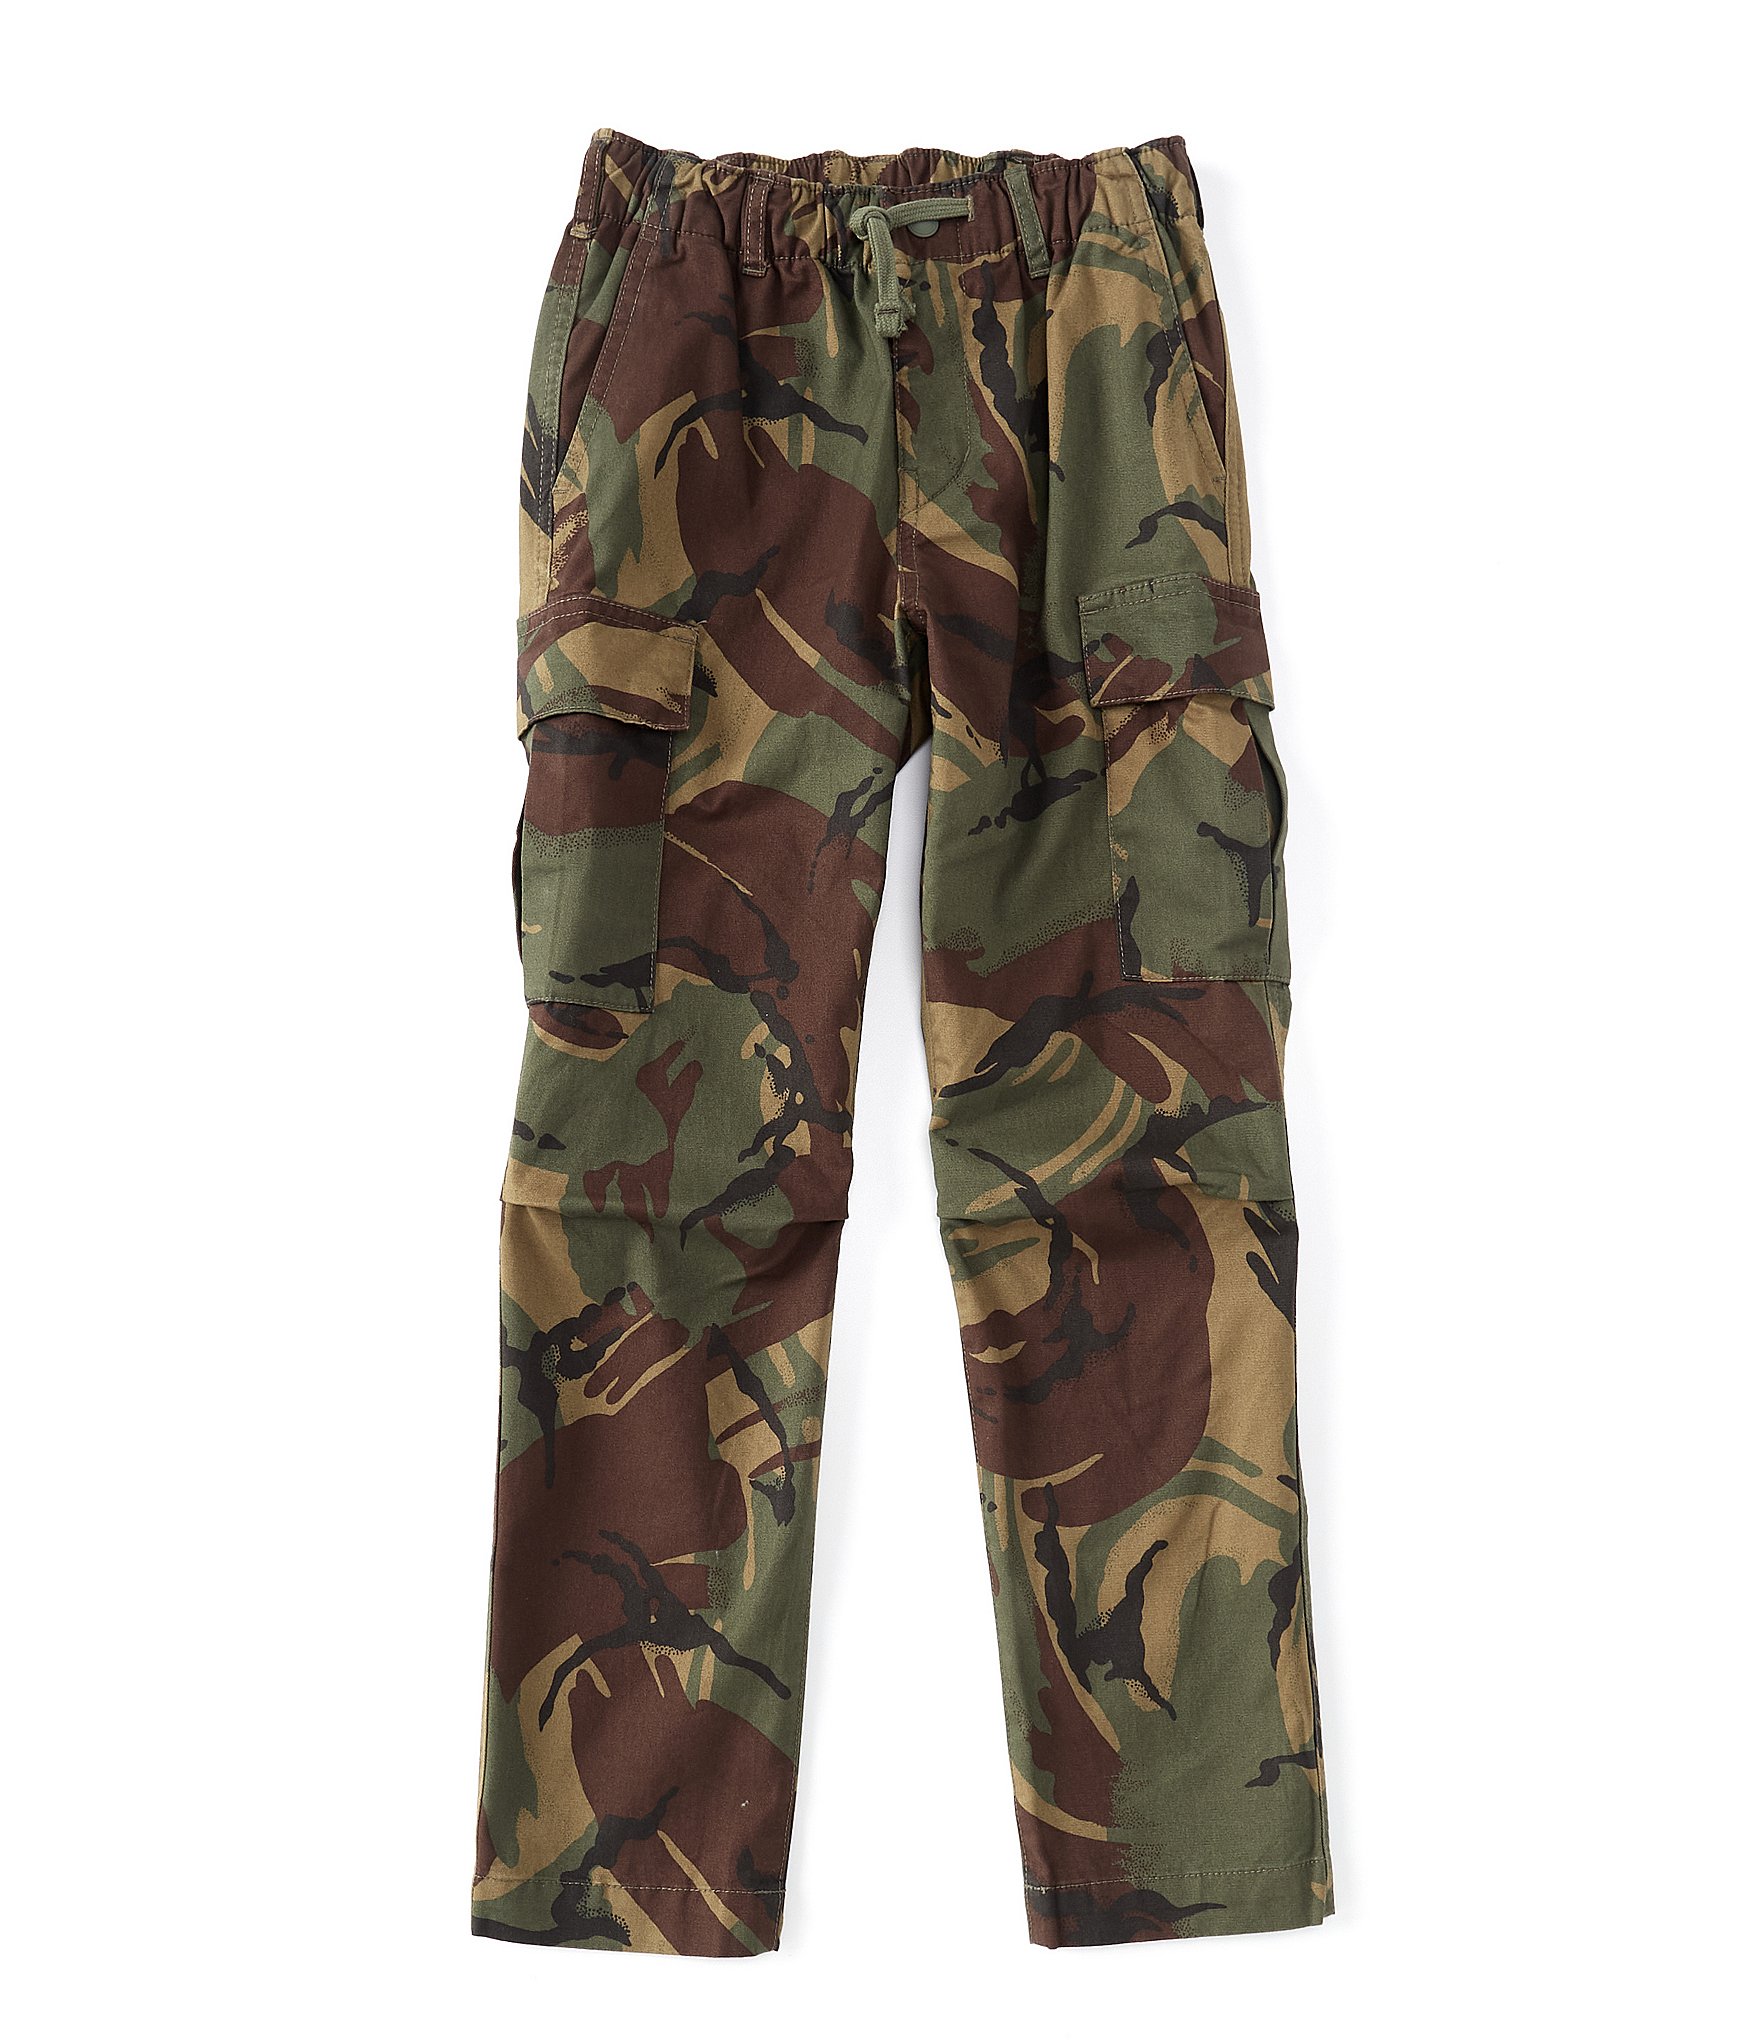 Buy Boys Cargo Pants For Kids Size 26 at Amazon.in